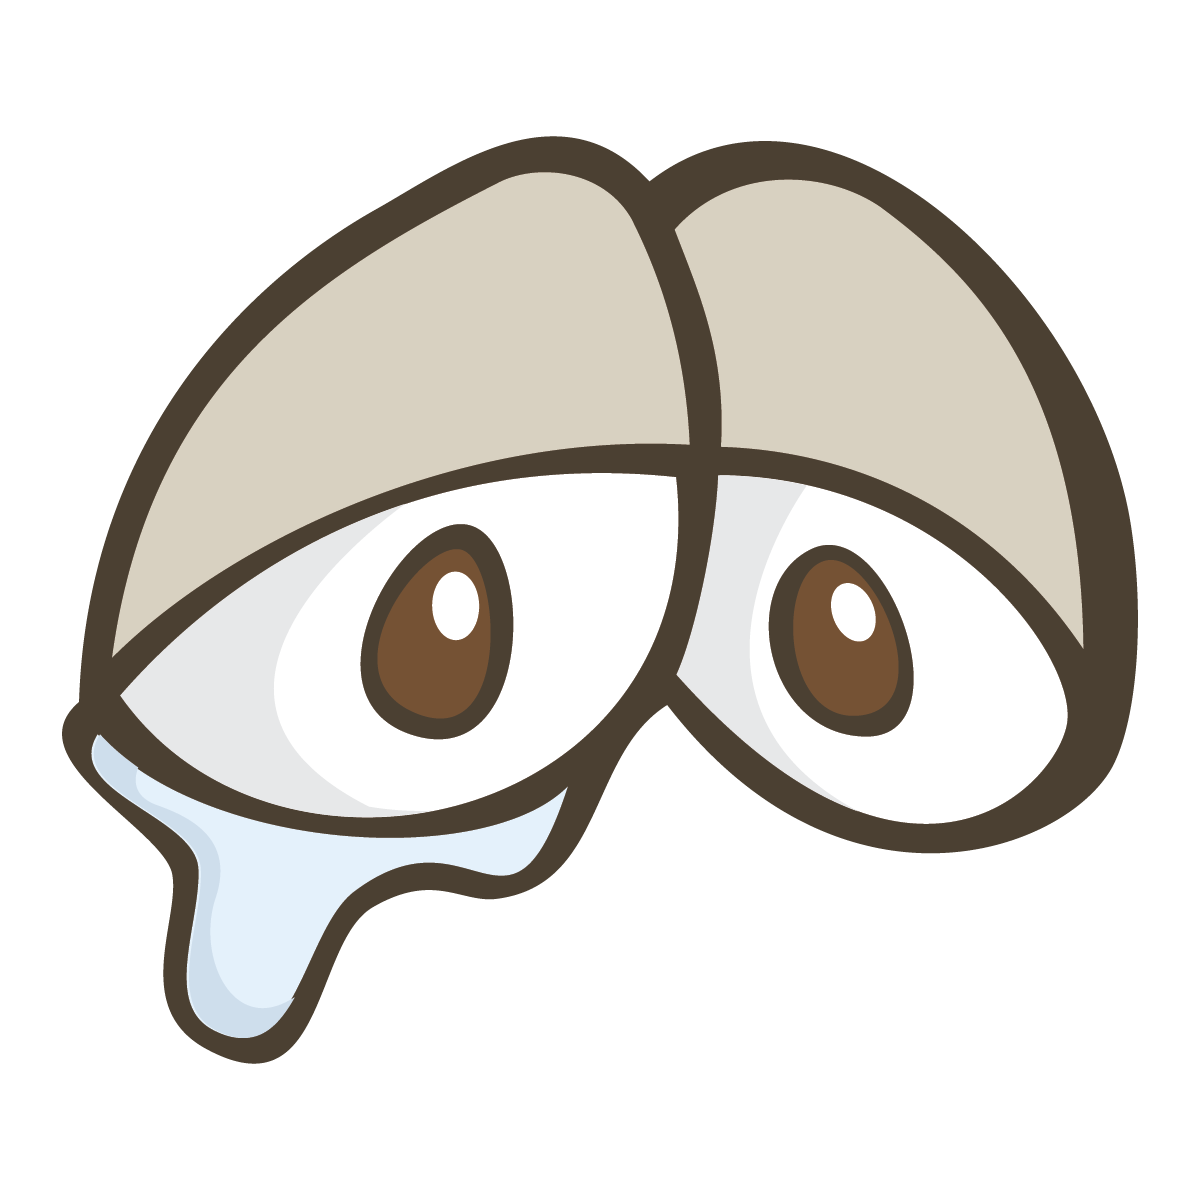 Eyeball clipart kind eye. Free crying cliparts download